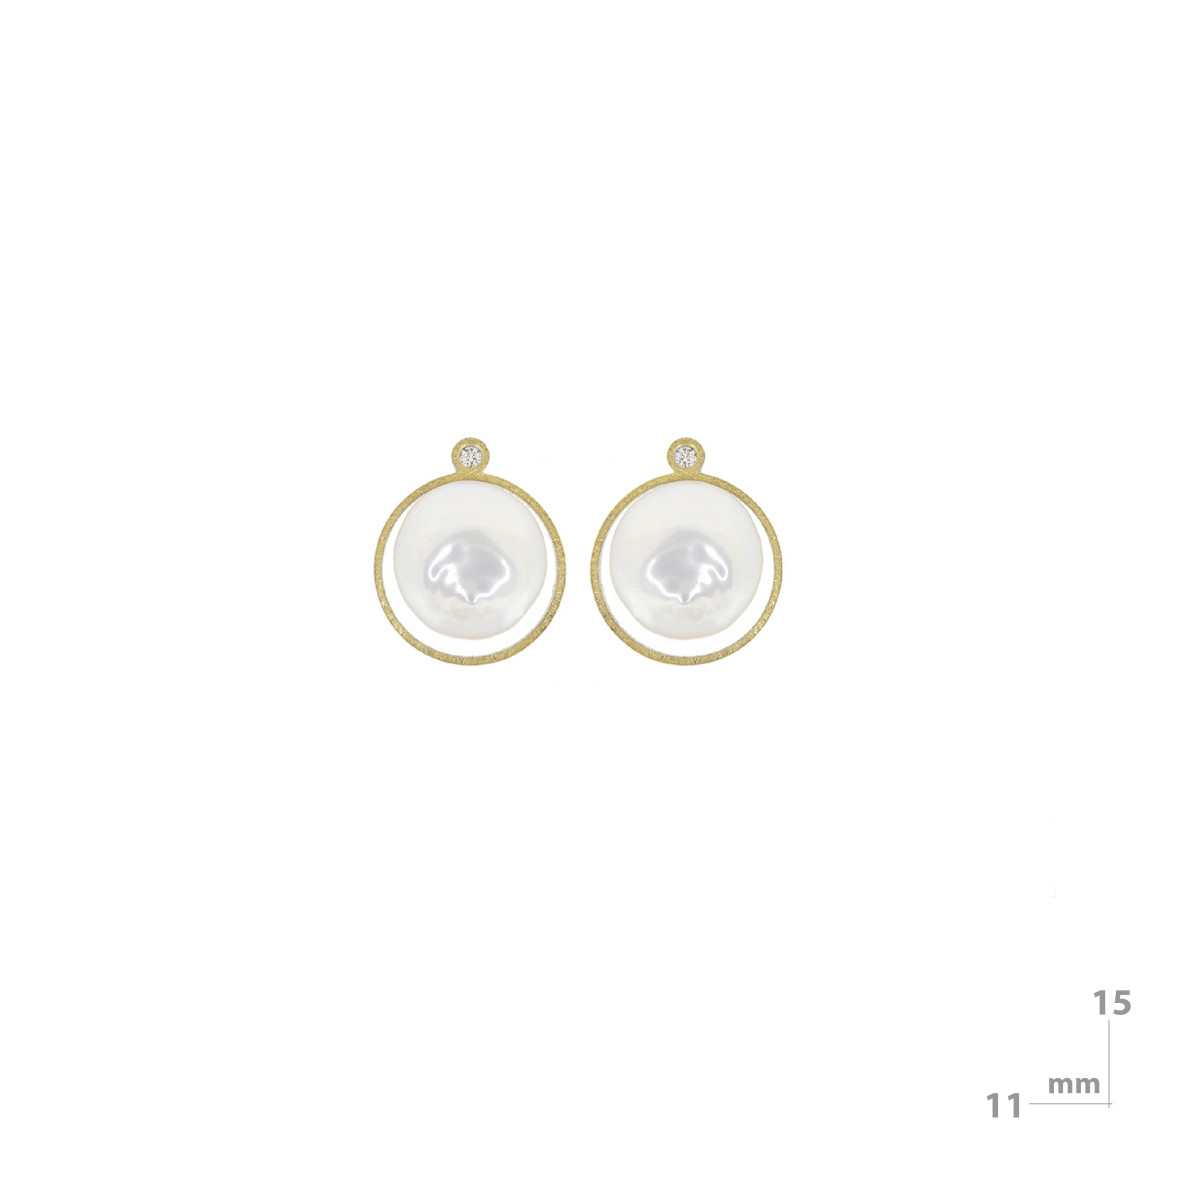 Silver, gold, cultured pearl and brilliant earrings